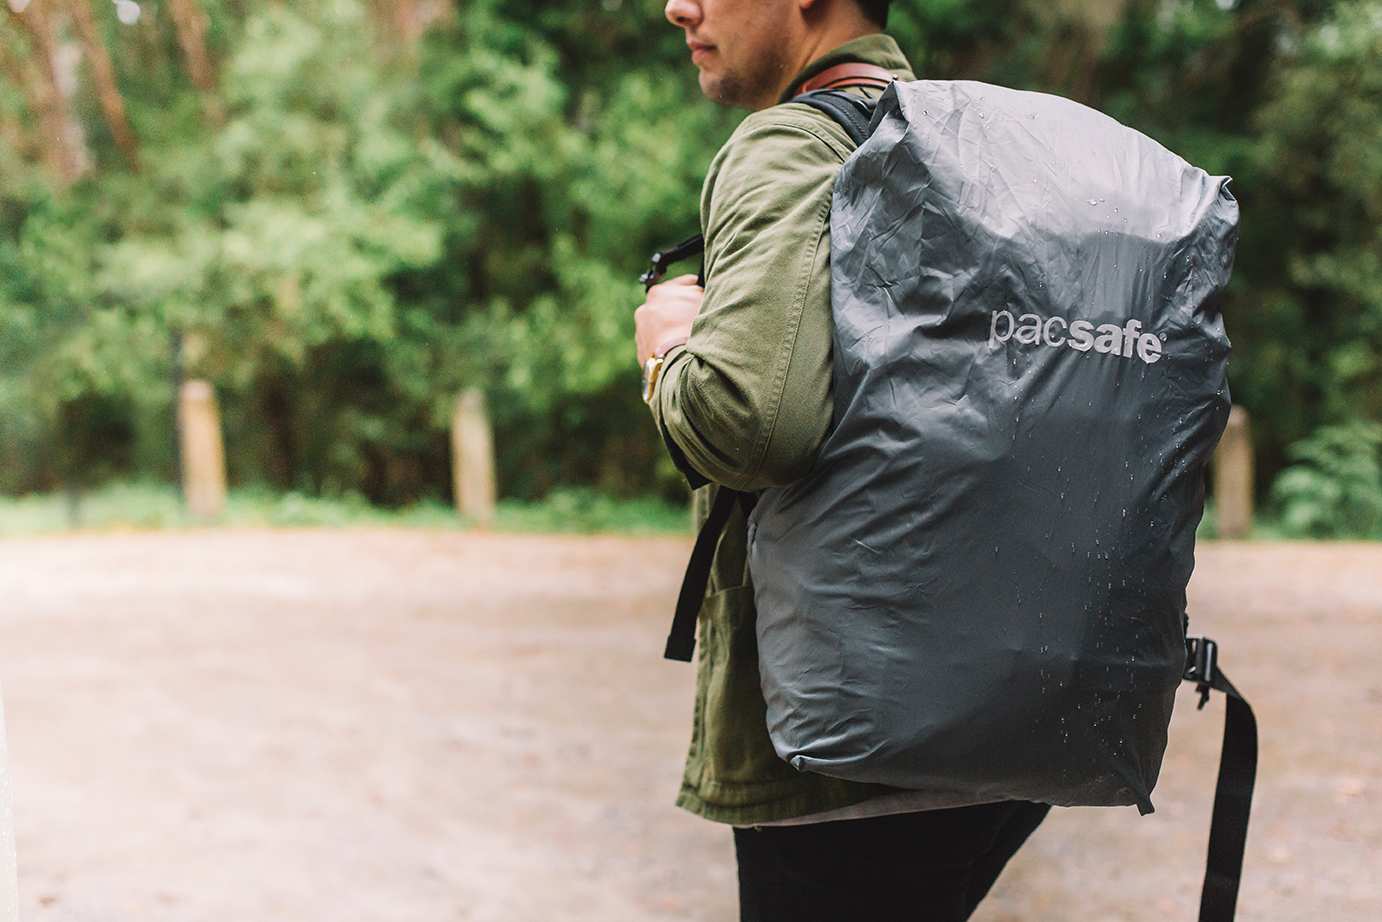 Pacsafe's light rain cover is handcrafted specially to protect your precious carry-ons during the rainy season